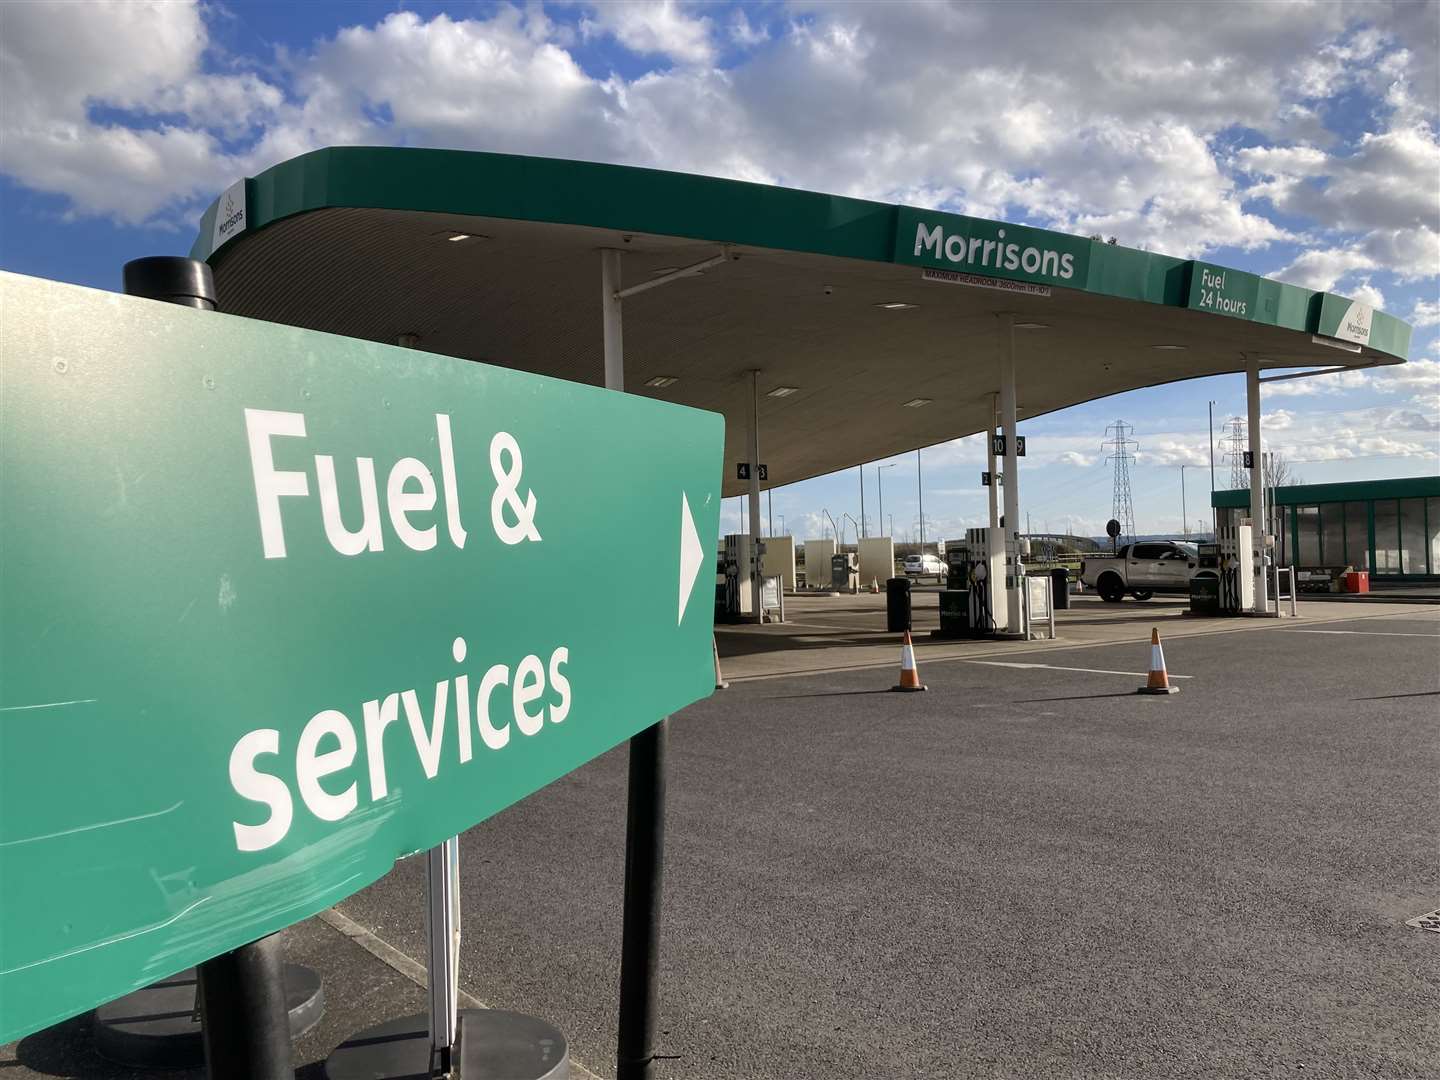 Beaney put £69.97 of diesel in his BMW 525 D at the Morrisons petrol station in Thomsett Way and drove off without paying